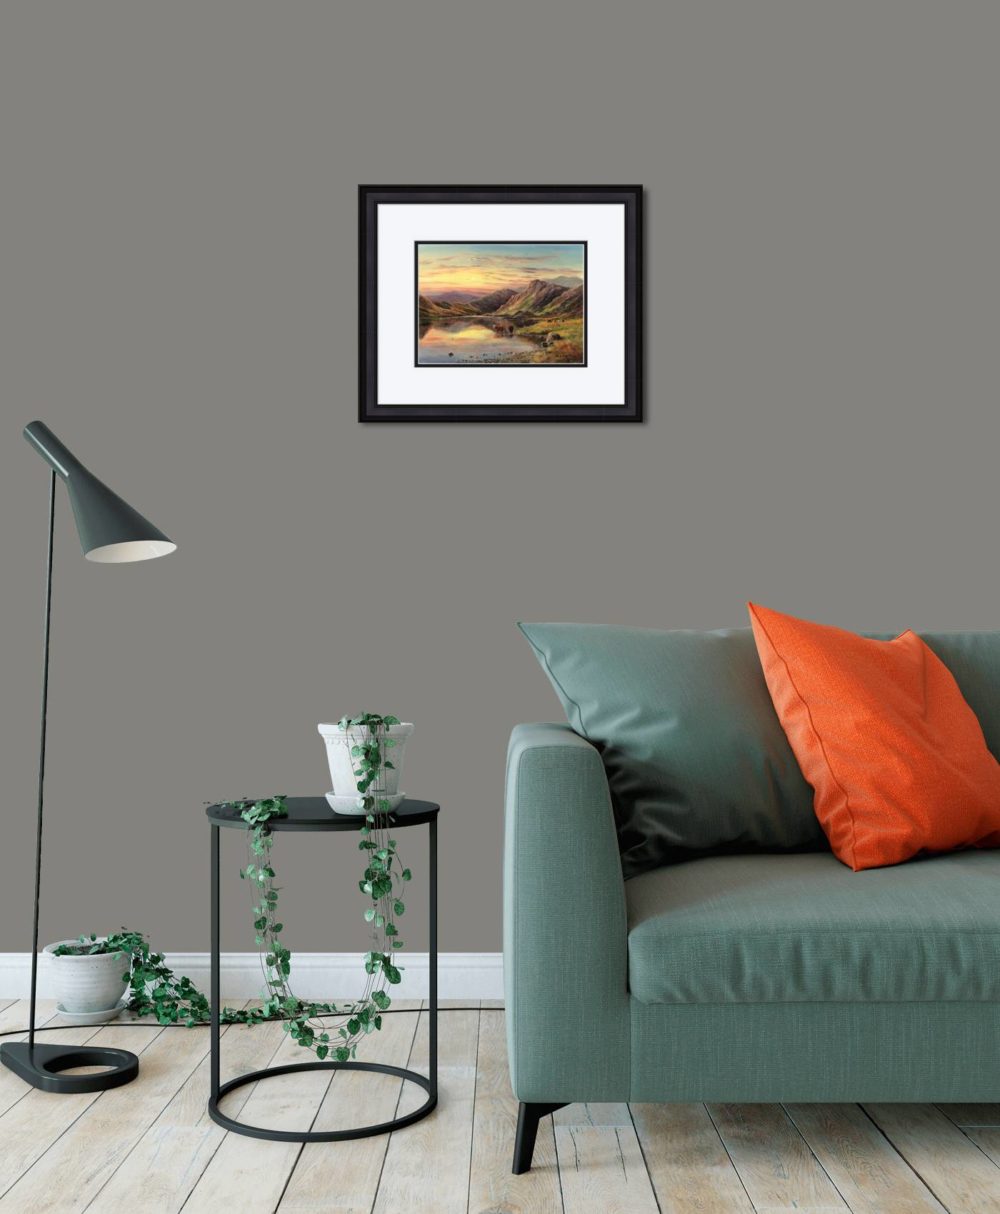 Highland Cattle Print (Small) in Black Frame in Room